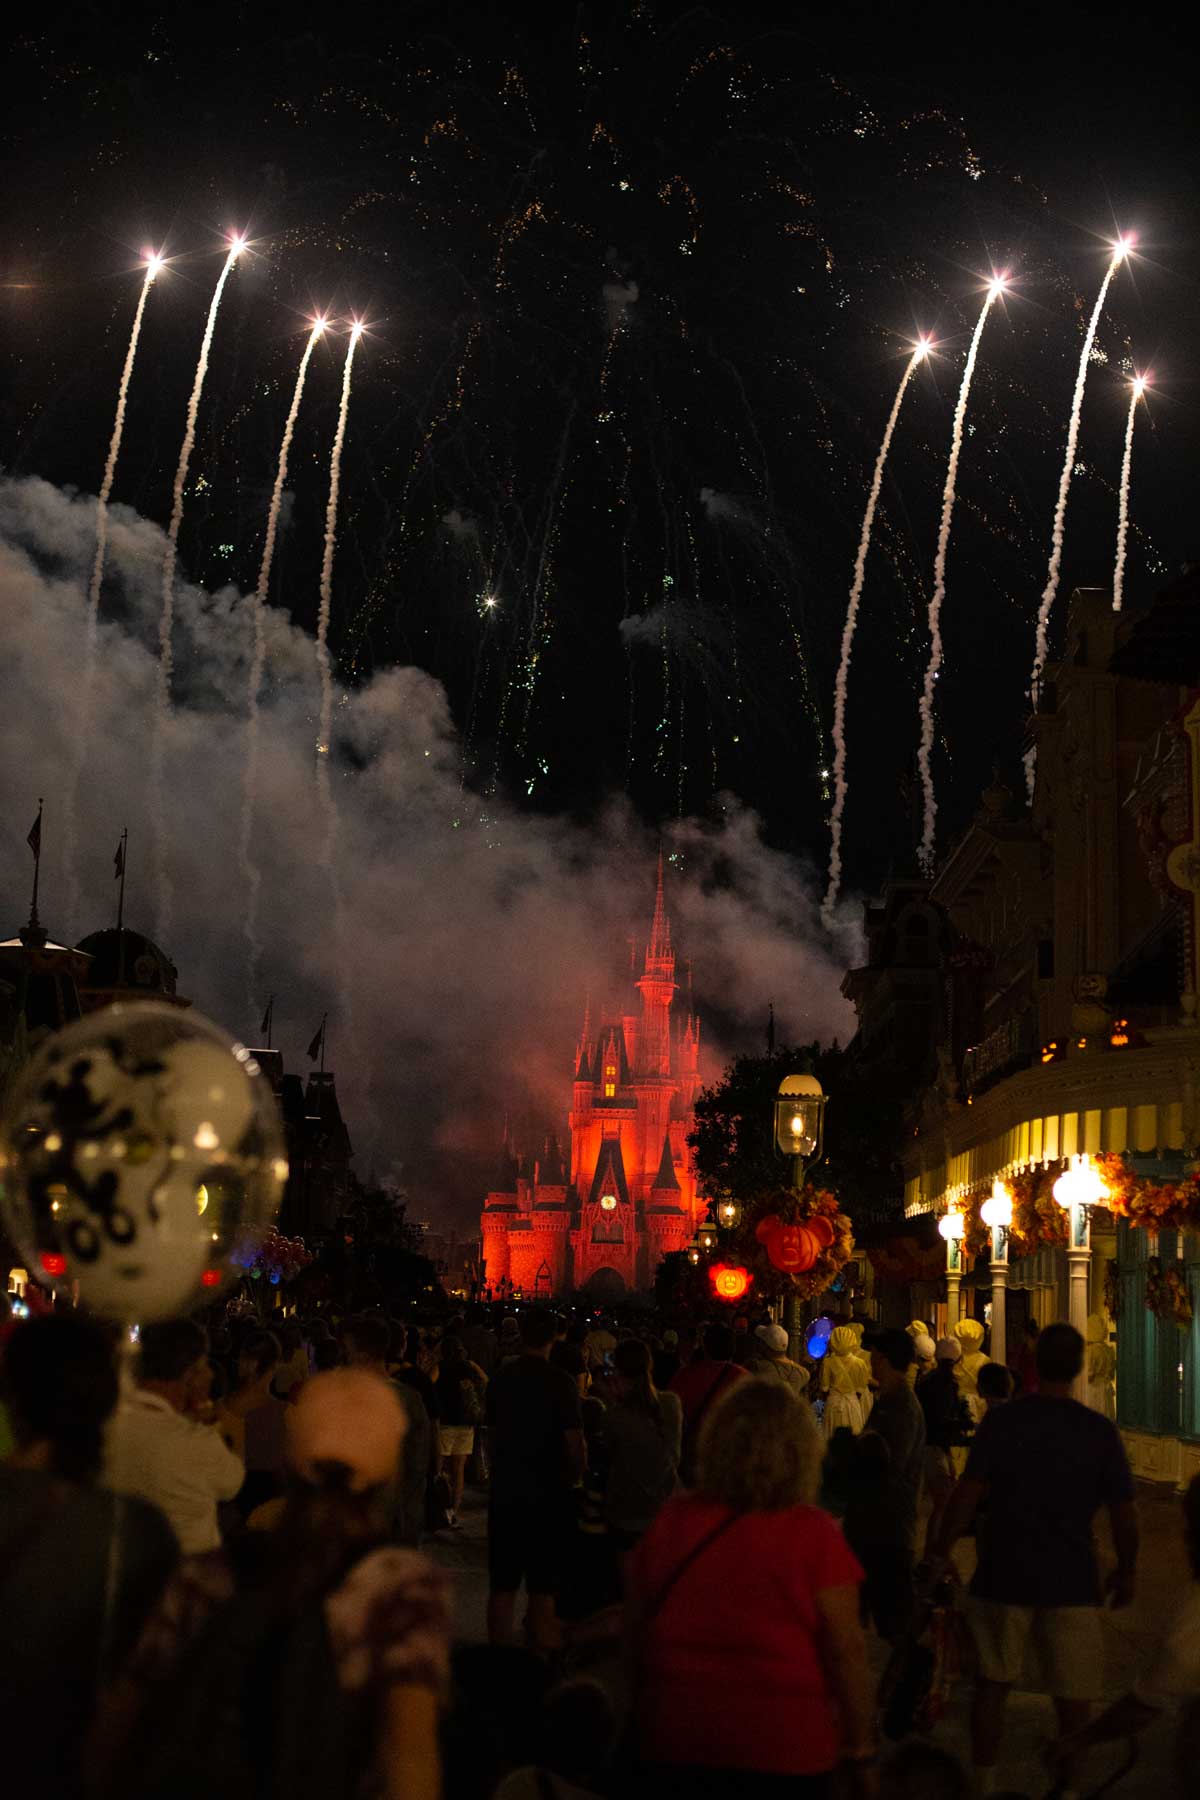 The fireworks above Cinderella's Castle can be seen from quite a distance.